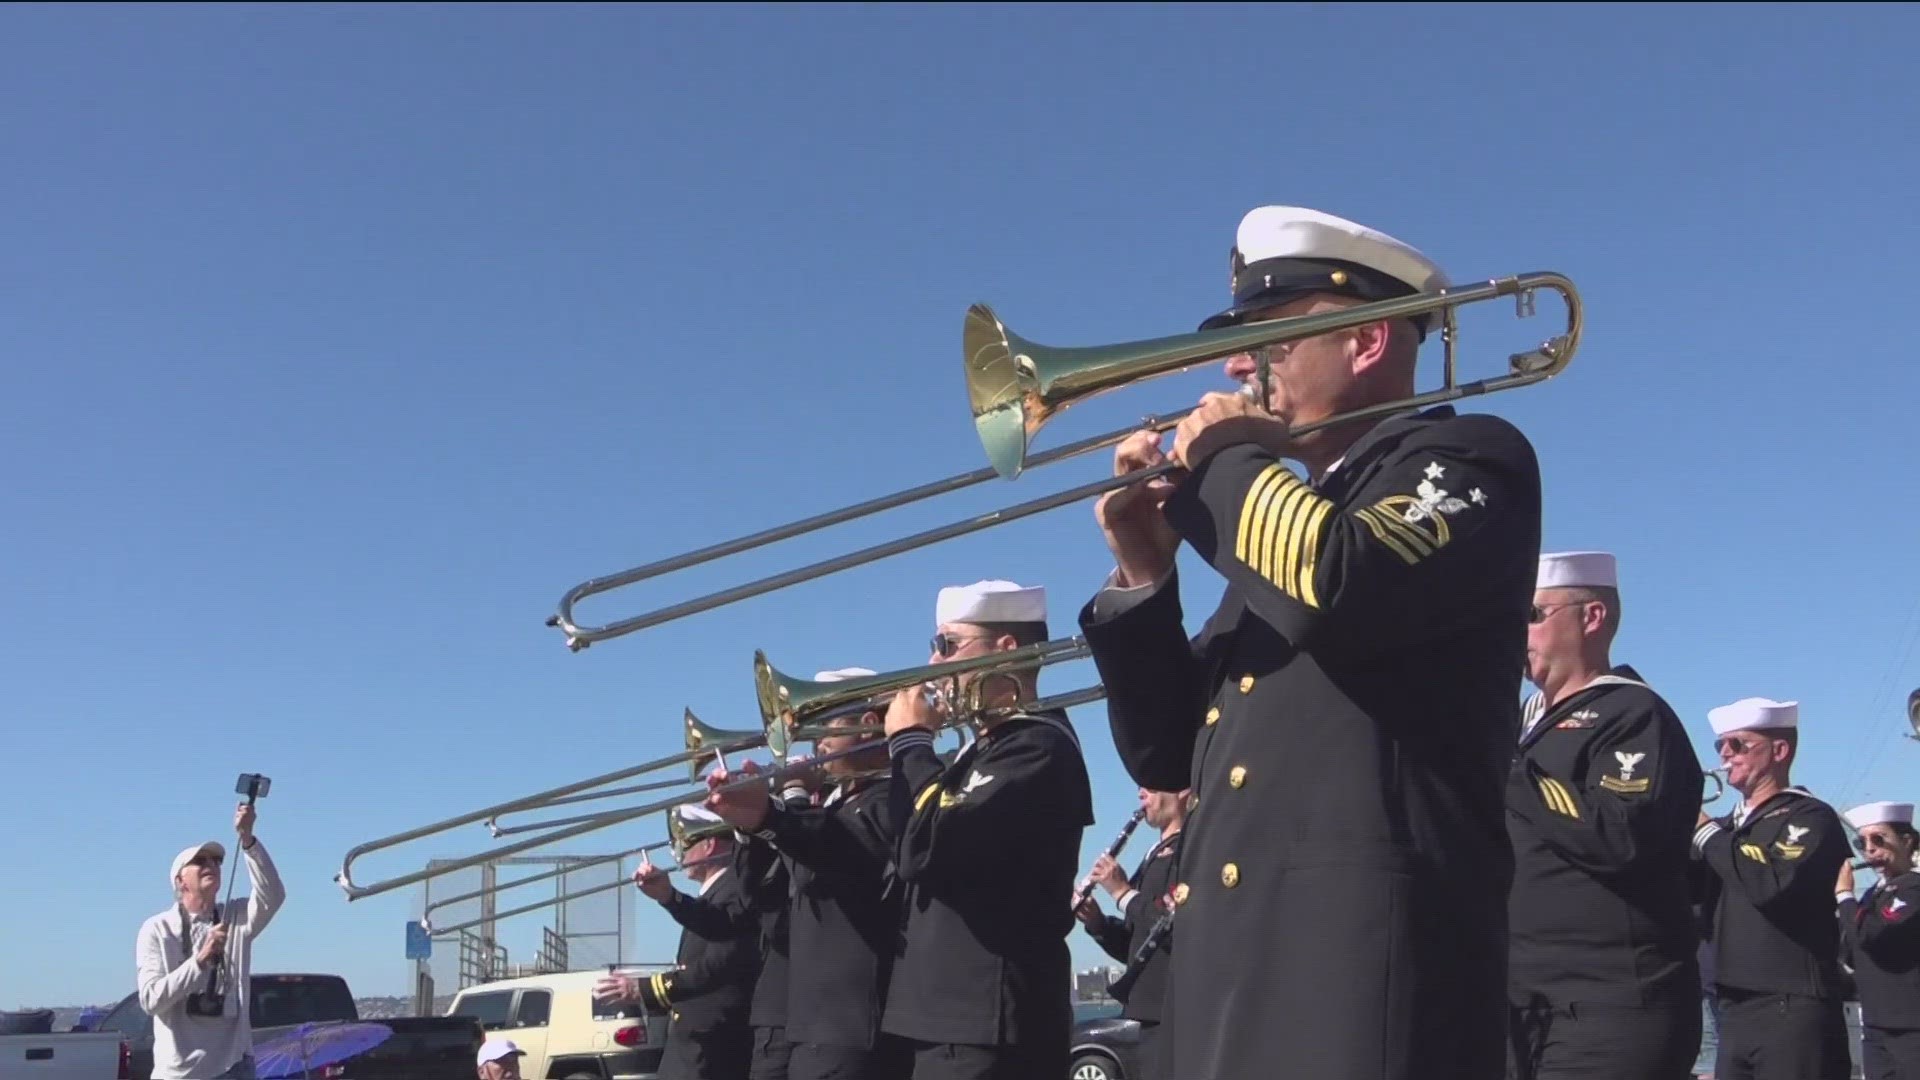 The San Diego Veterans Day Parade is back after three years, celebrating service and sacrifice.